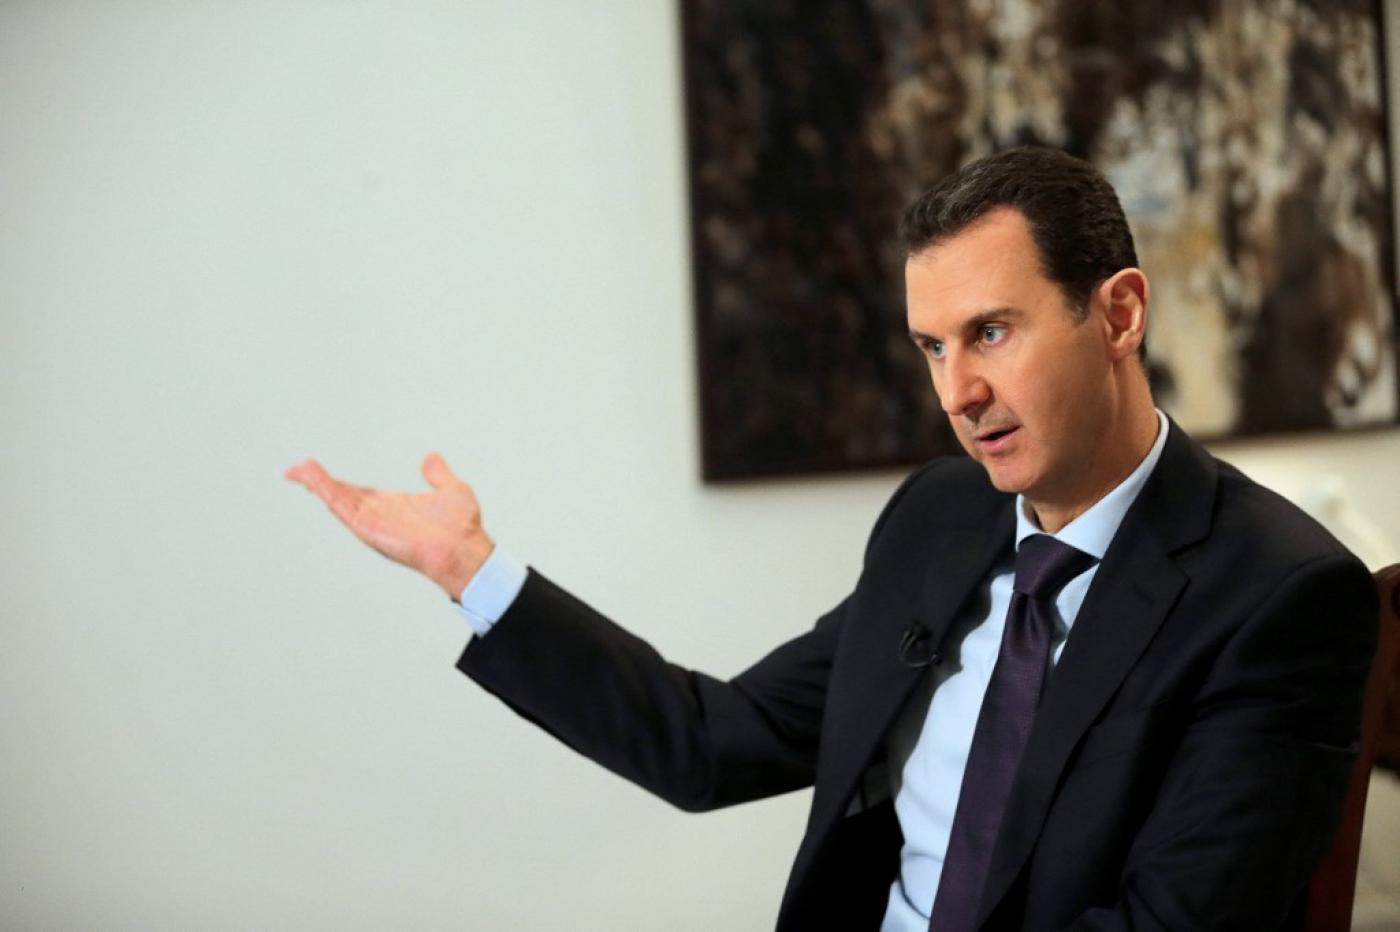 Syria war: Will the Arab League welcome back Assad?